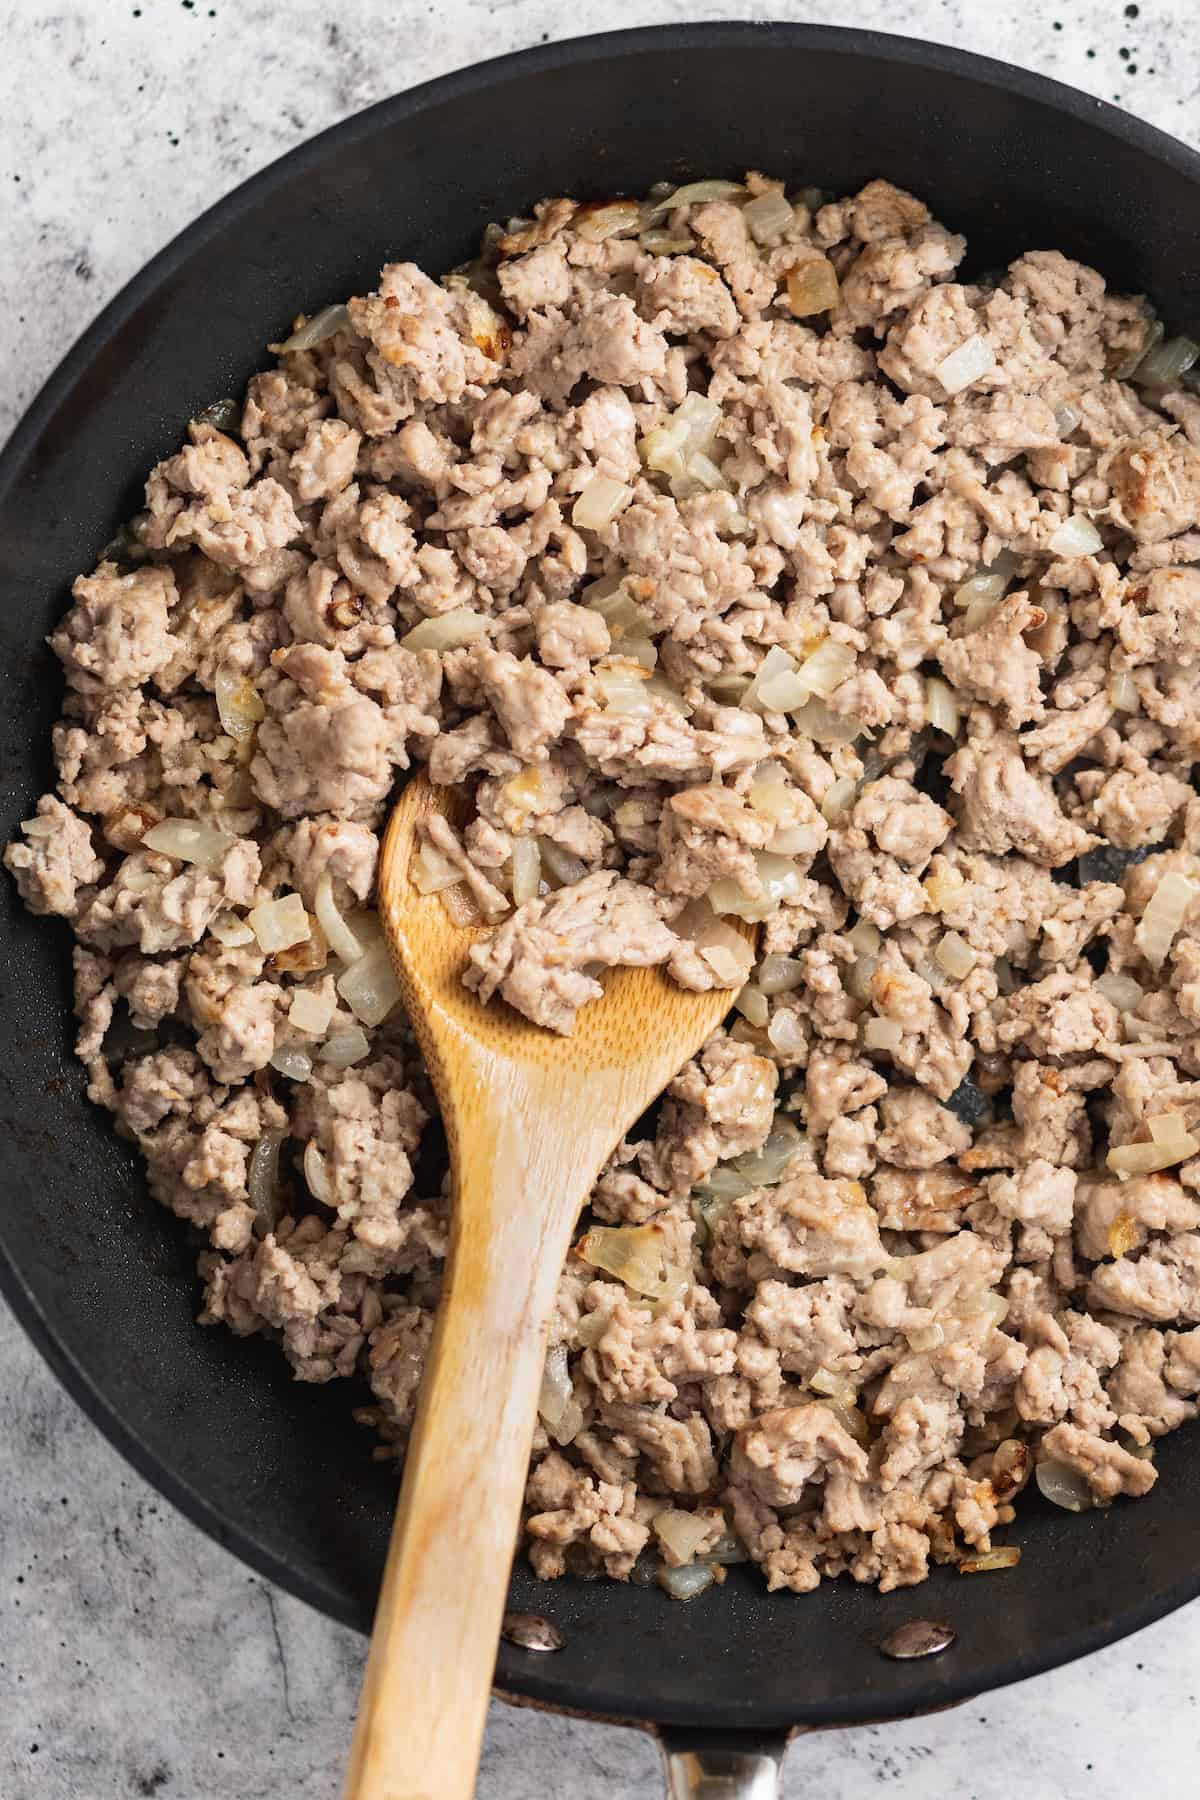 Cooking the ground chicken in the pan.